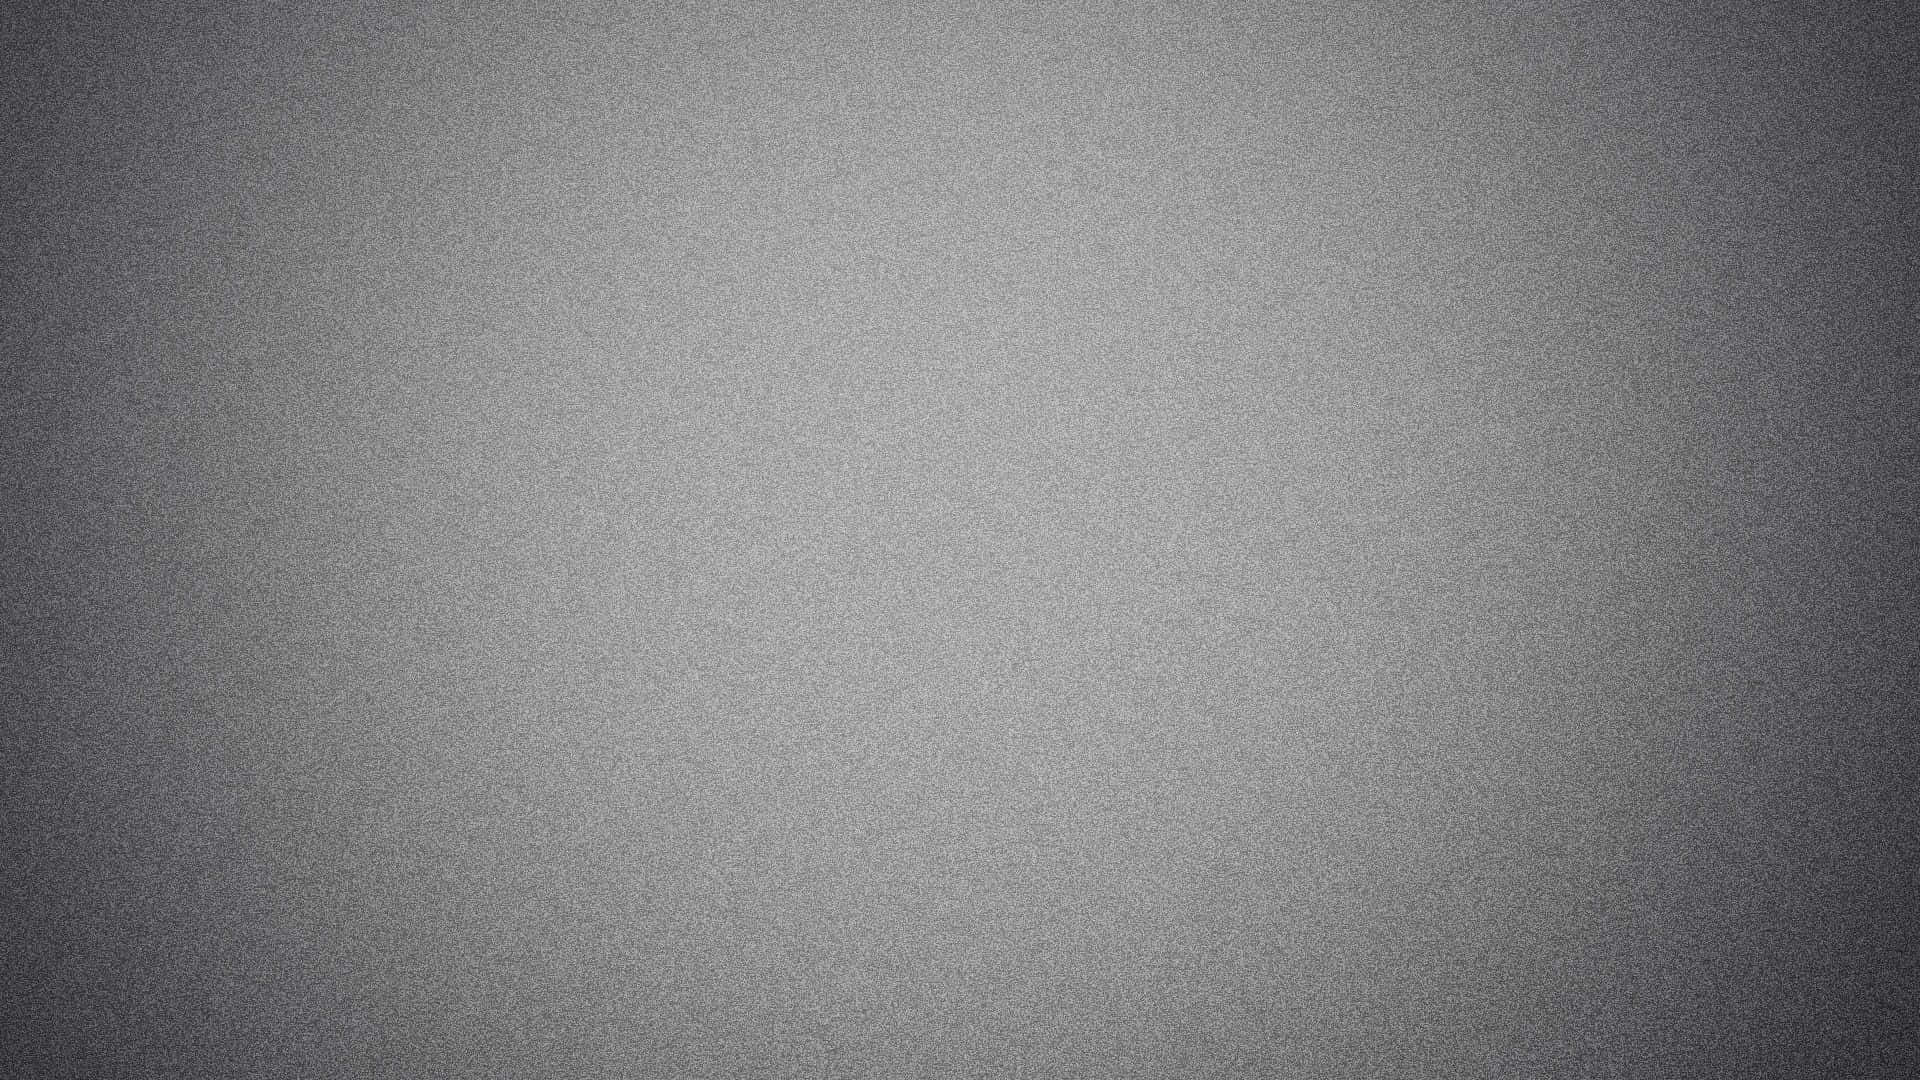 Vignette And Noise Texture Grey Background